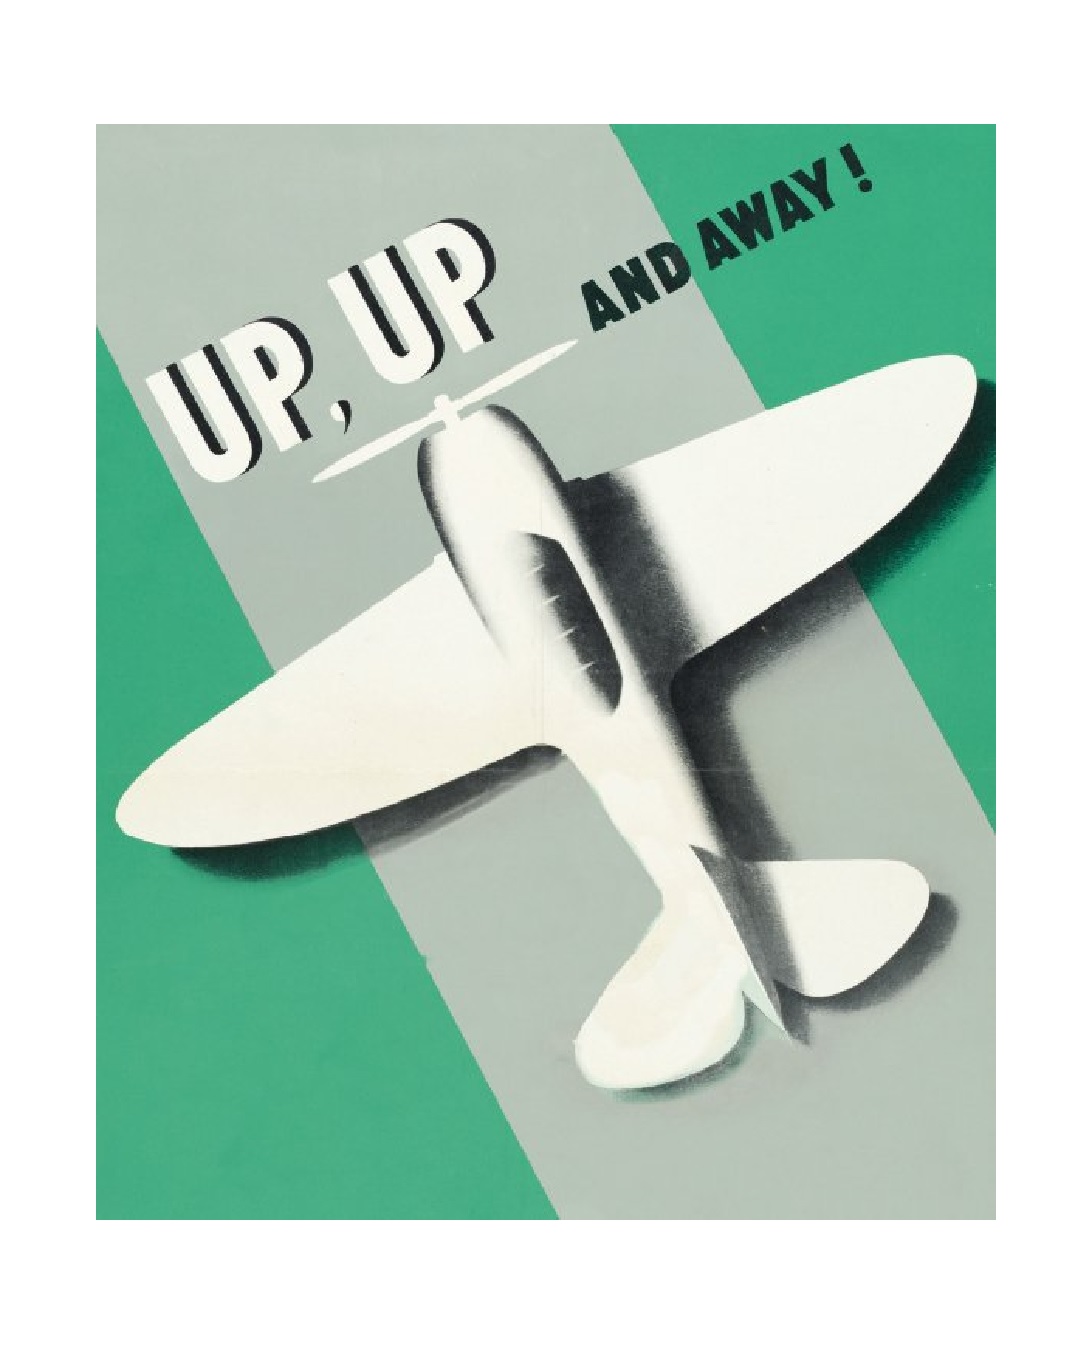 green and grey card with aeroplane on it